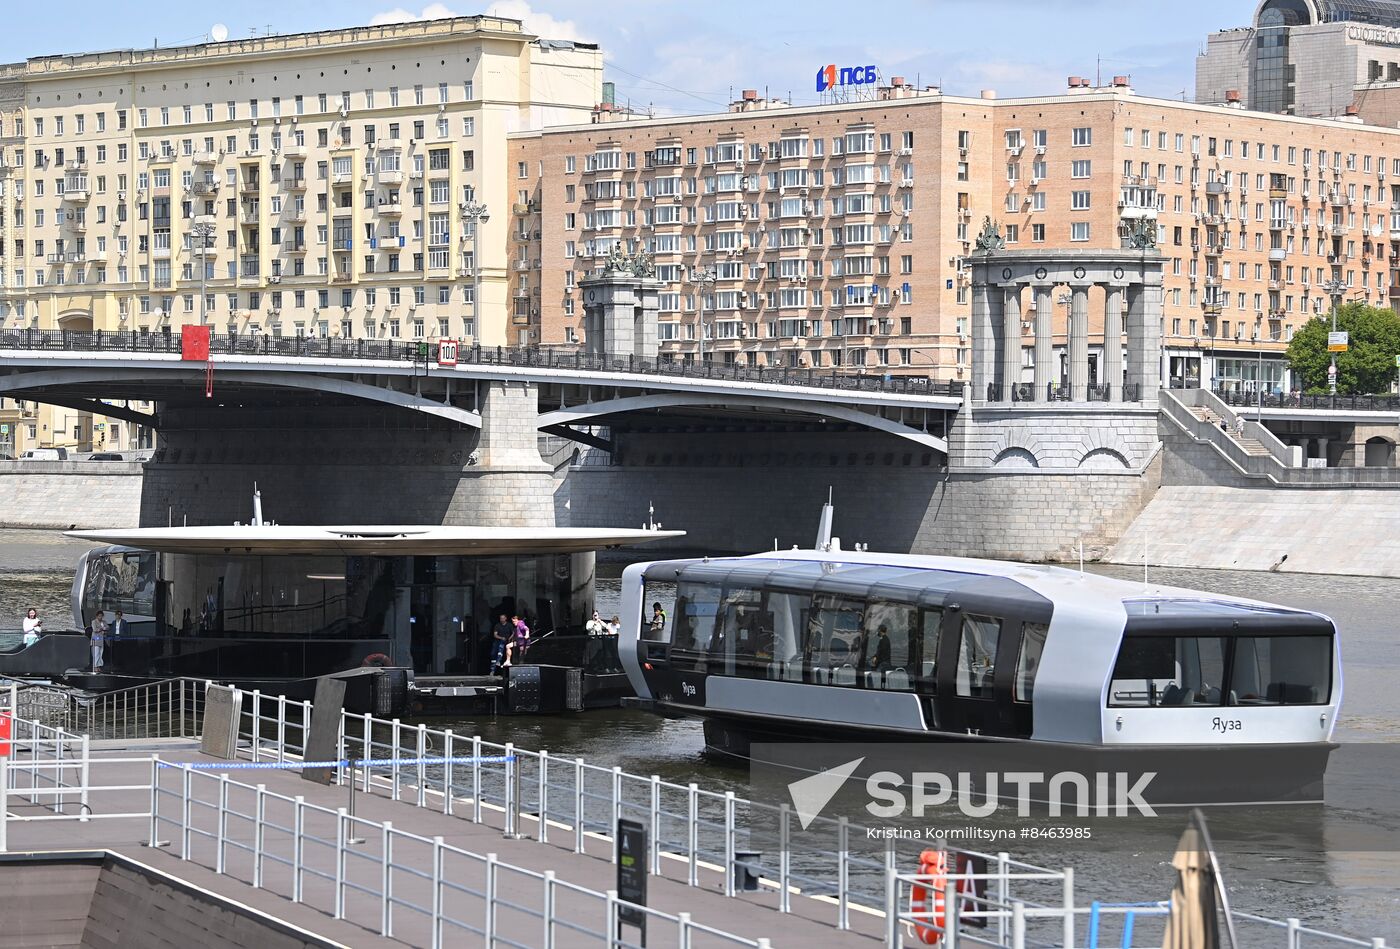 Russia Electric Riverboats